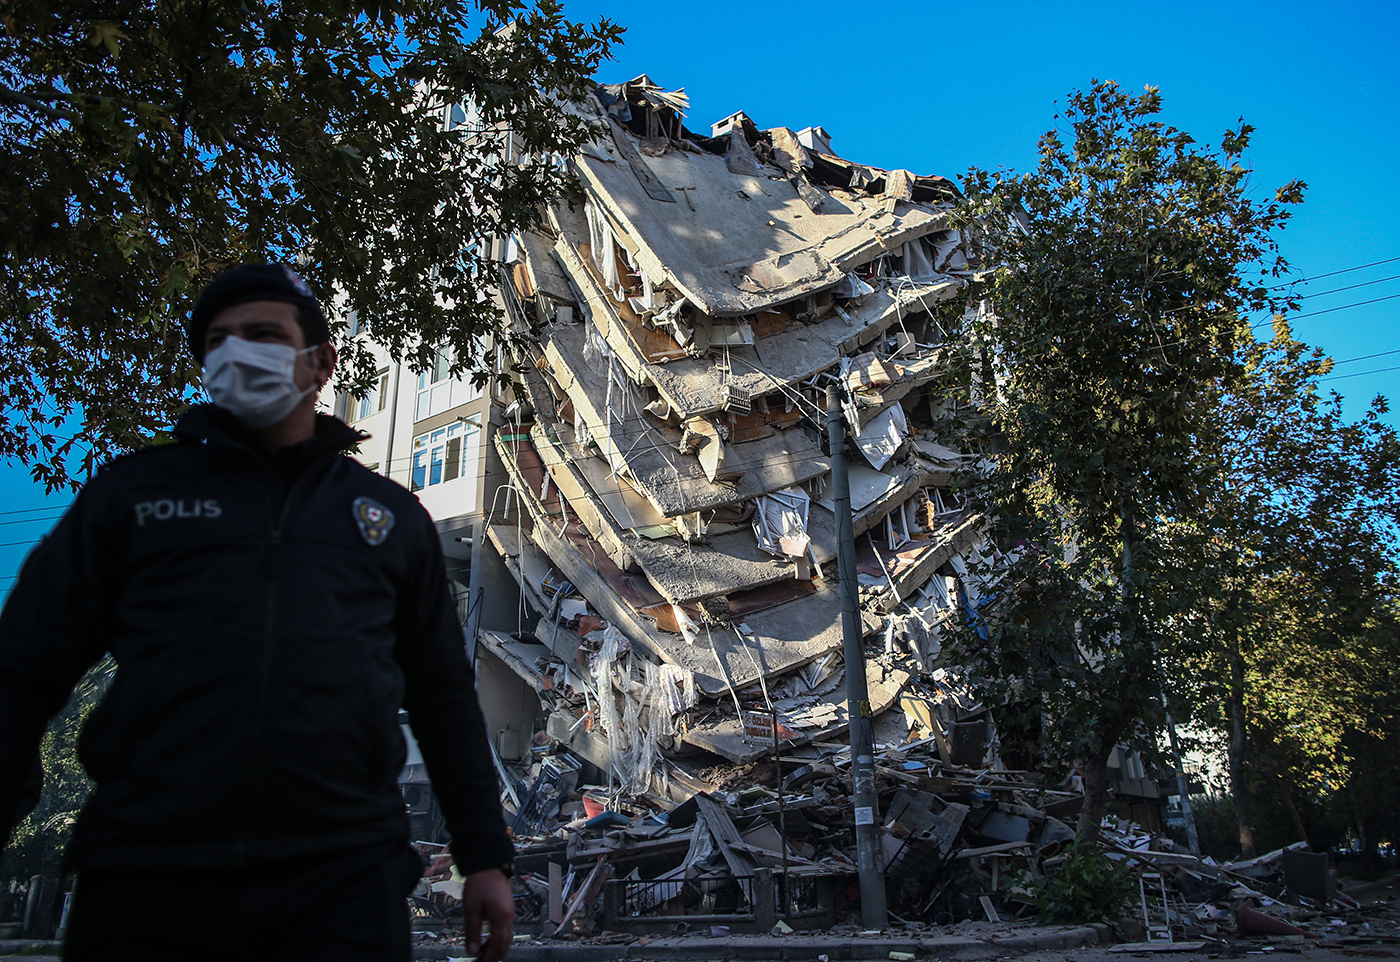 A Turkish police secure the area in front of a collapsed building after a 7.0 magnitude earthquake in the Aegean Sea, at Bayrakli district in Izmir, Turkey, 01 November 2020. According to Turkish media reports, at least forty nine people died while more than eight  hundreds were injured and dozens of buildings were destroyed in the earthquake.